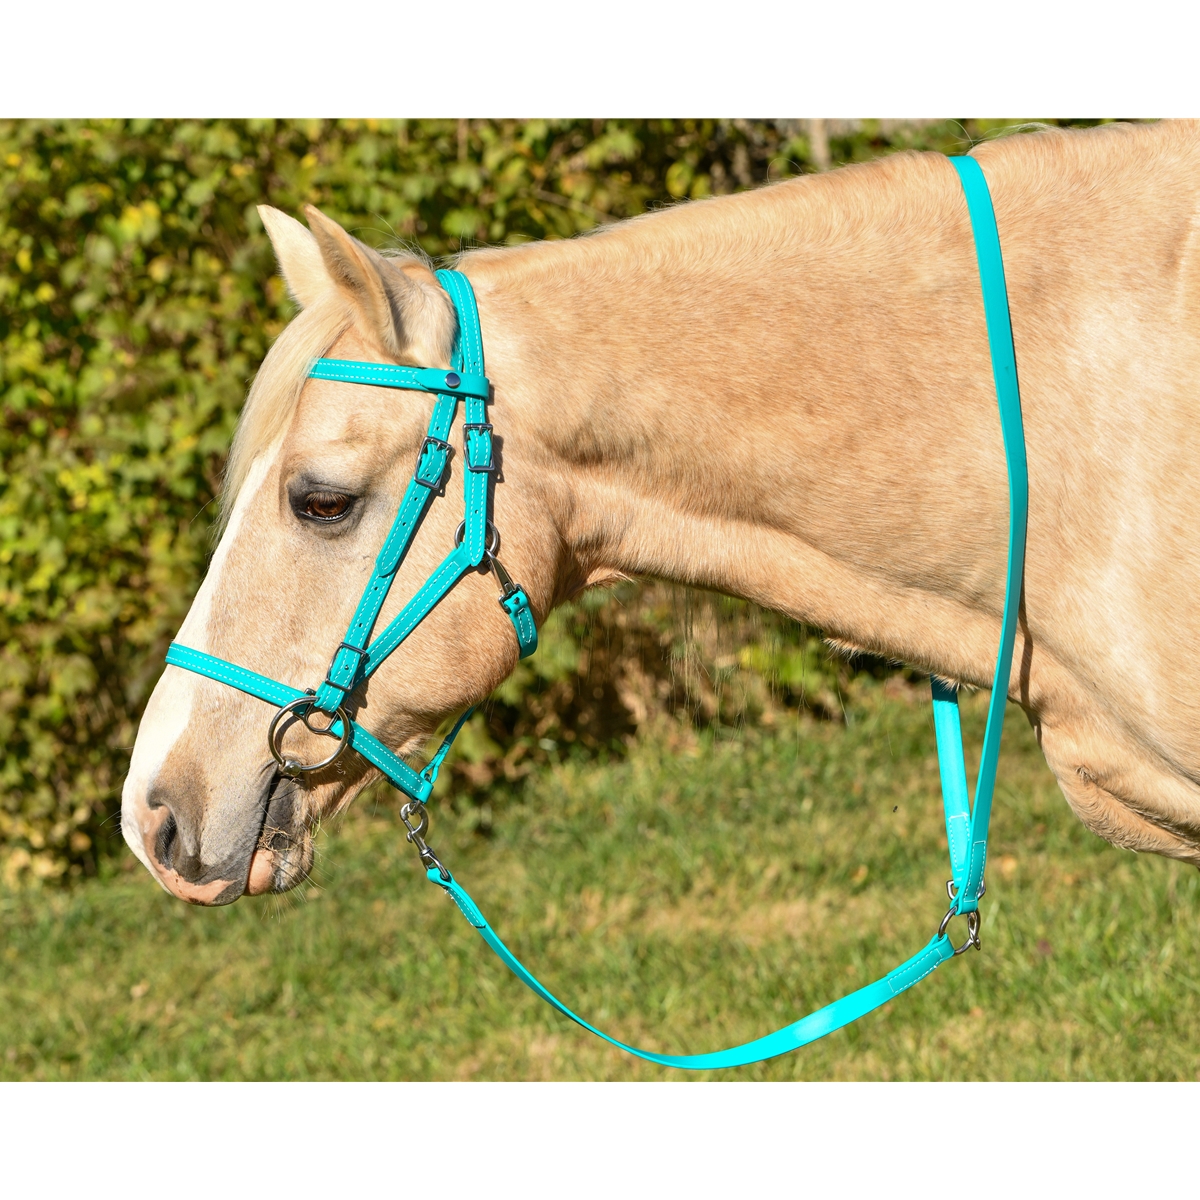 Shop Beta Biothane Leadlines with Two Horse Tack